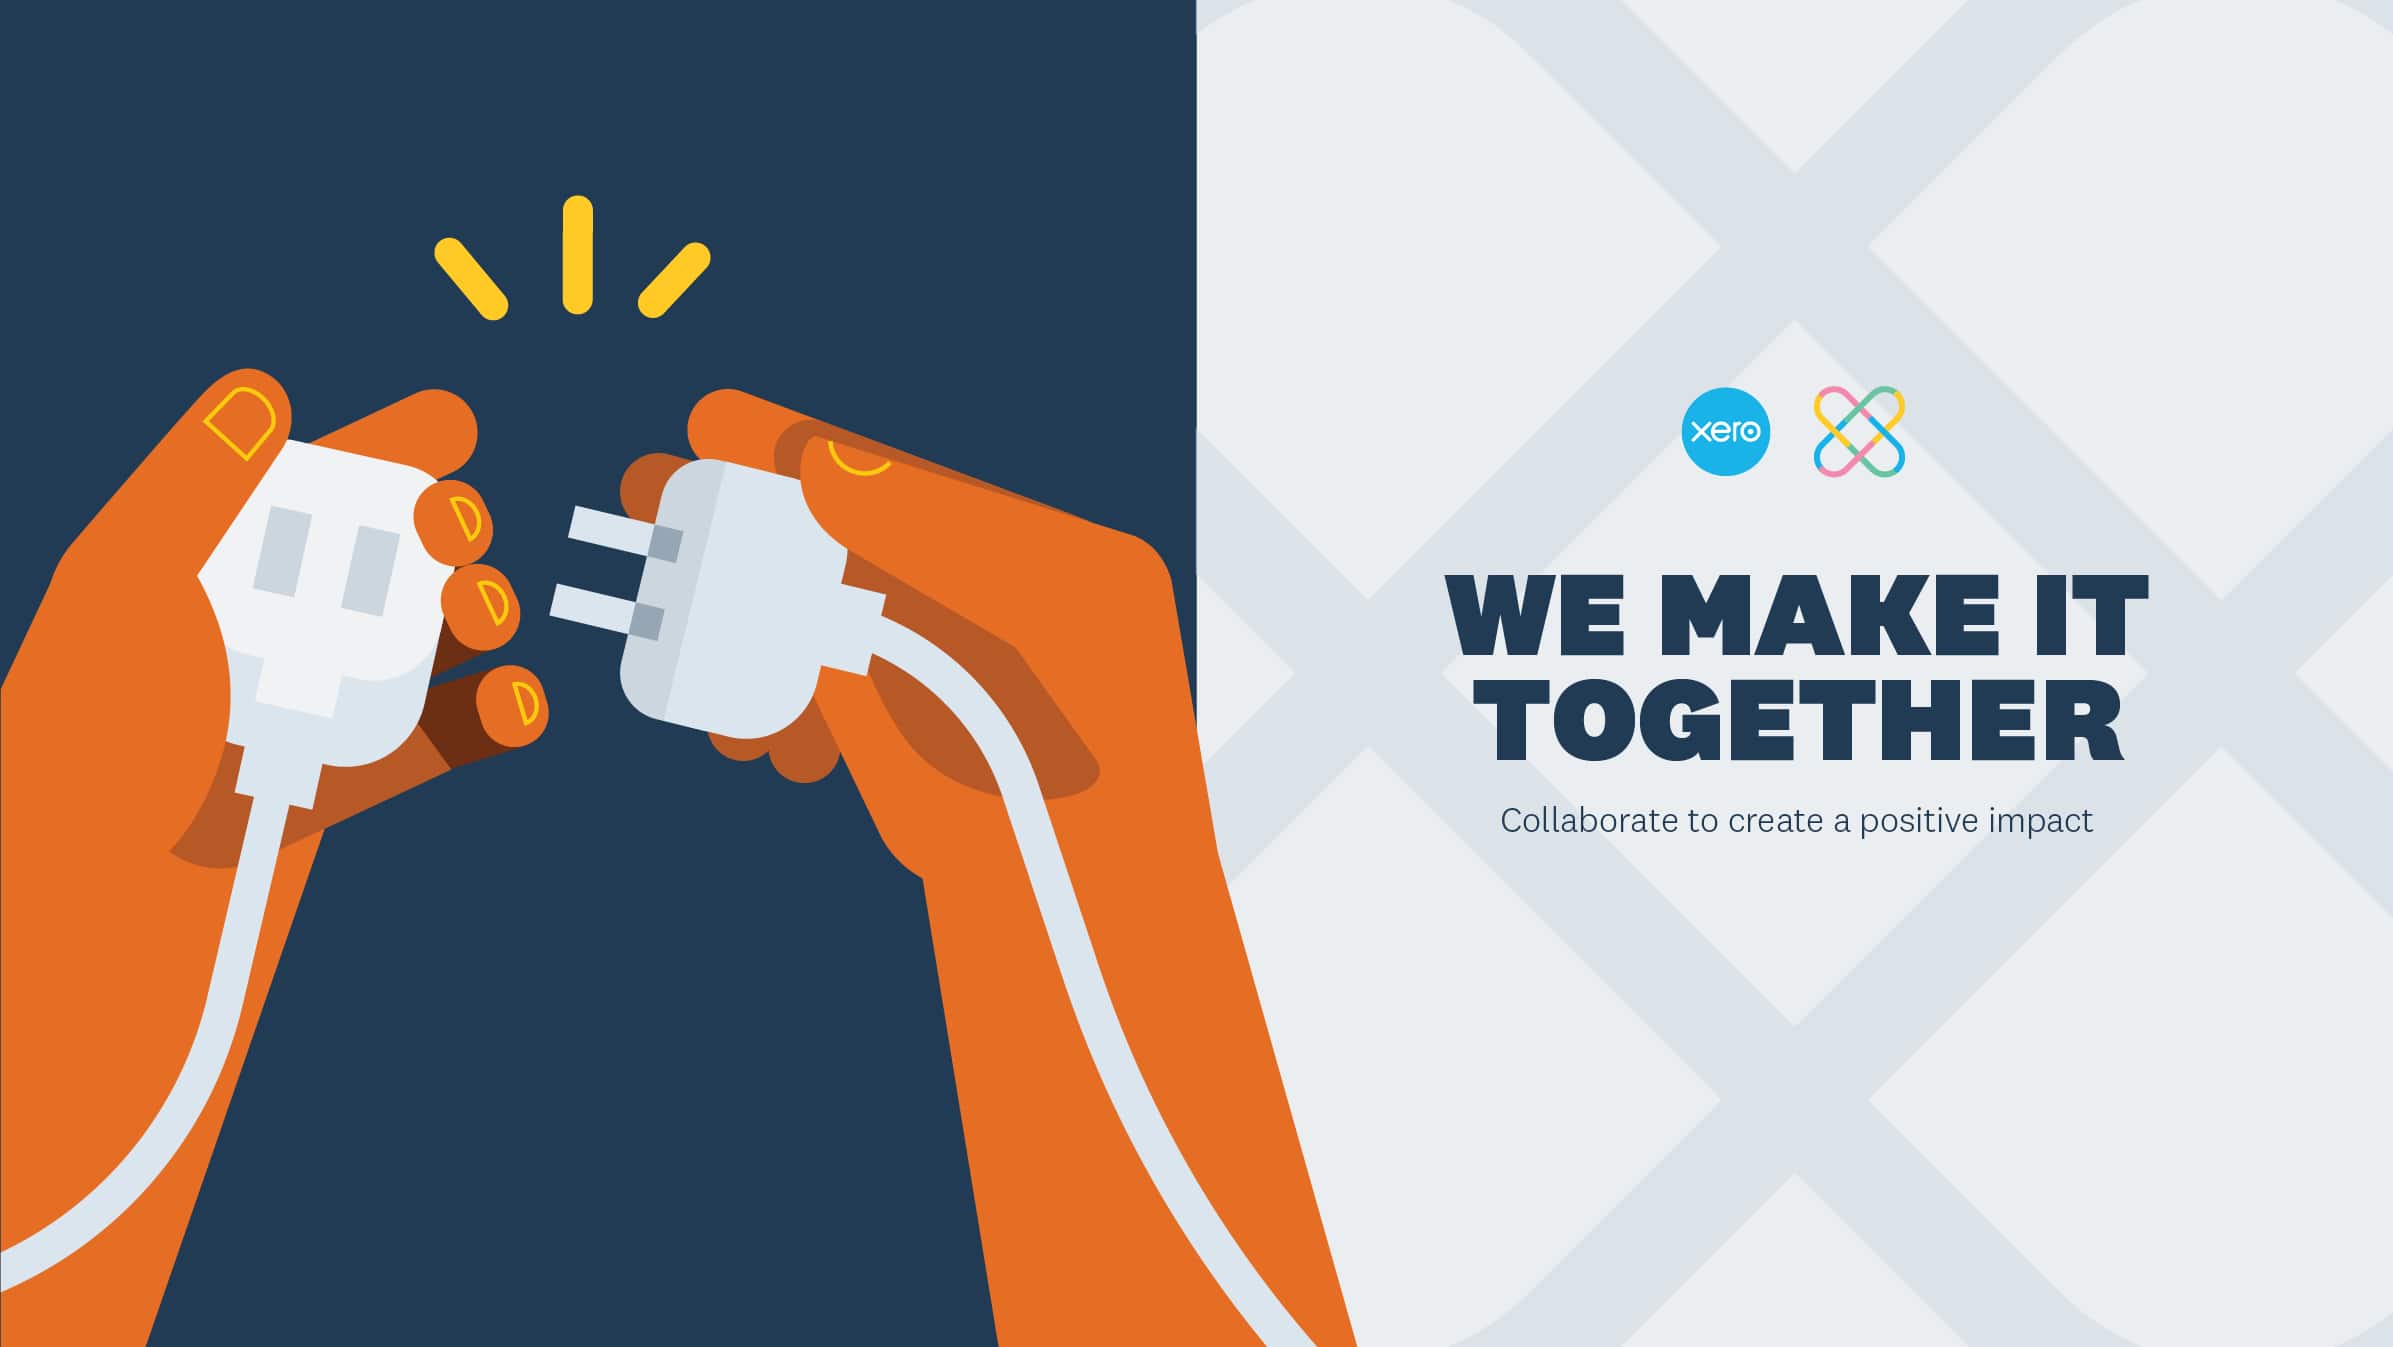 The Xero values icon for we make it together.